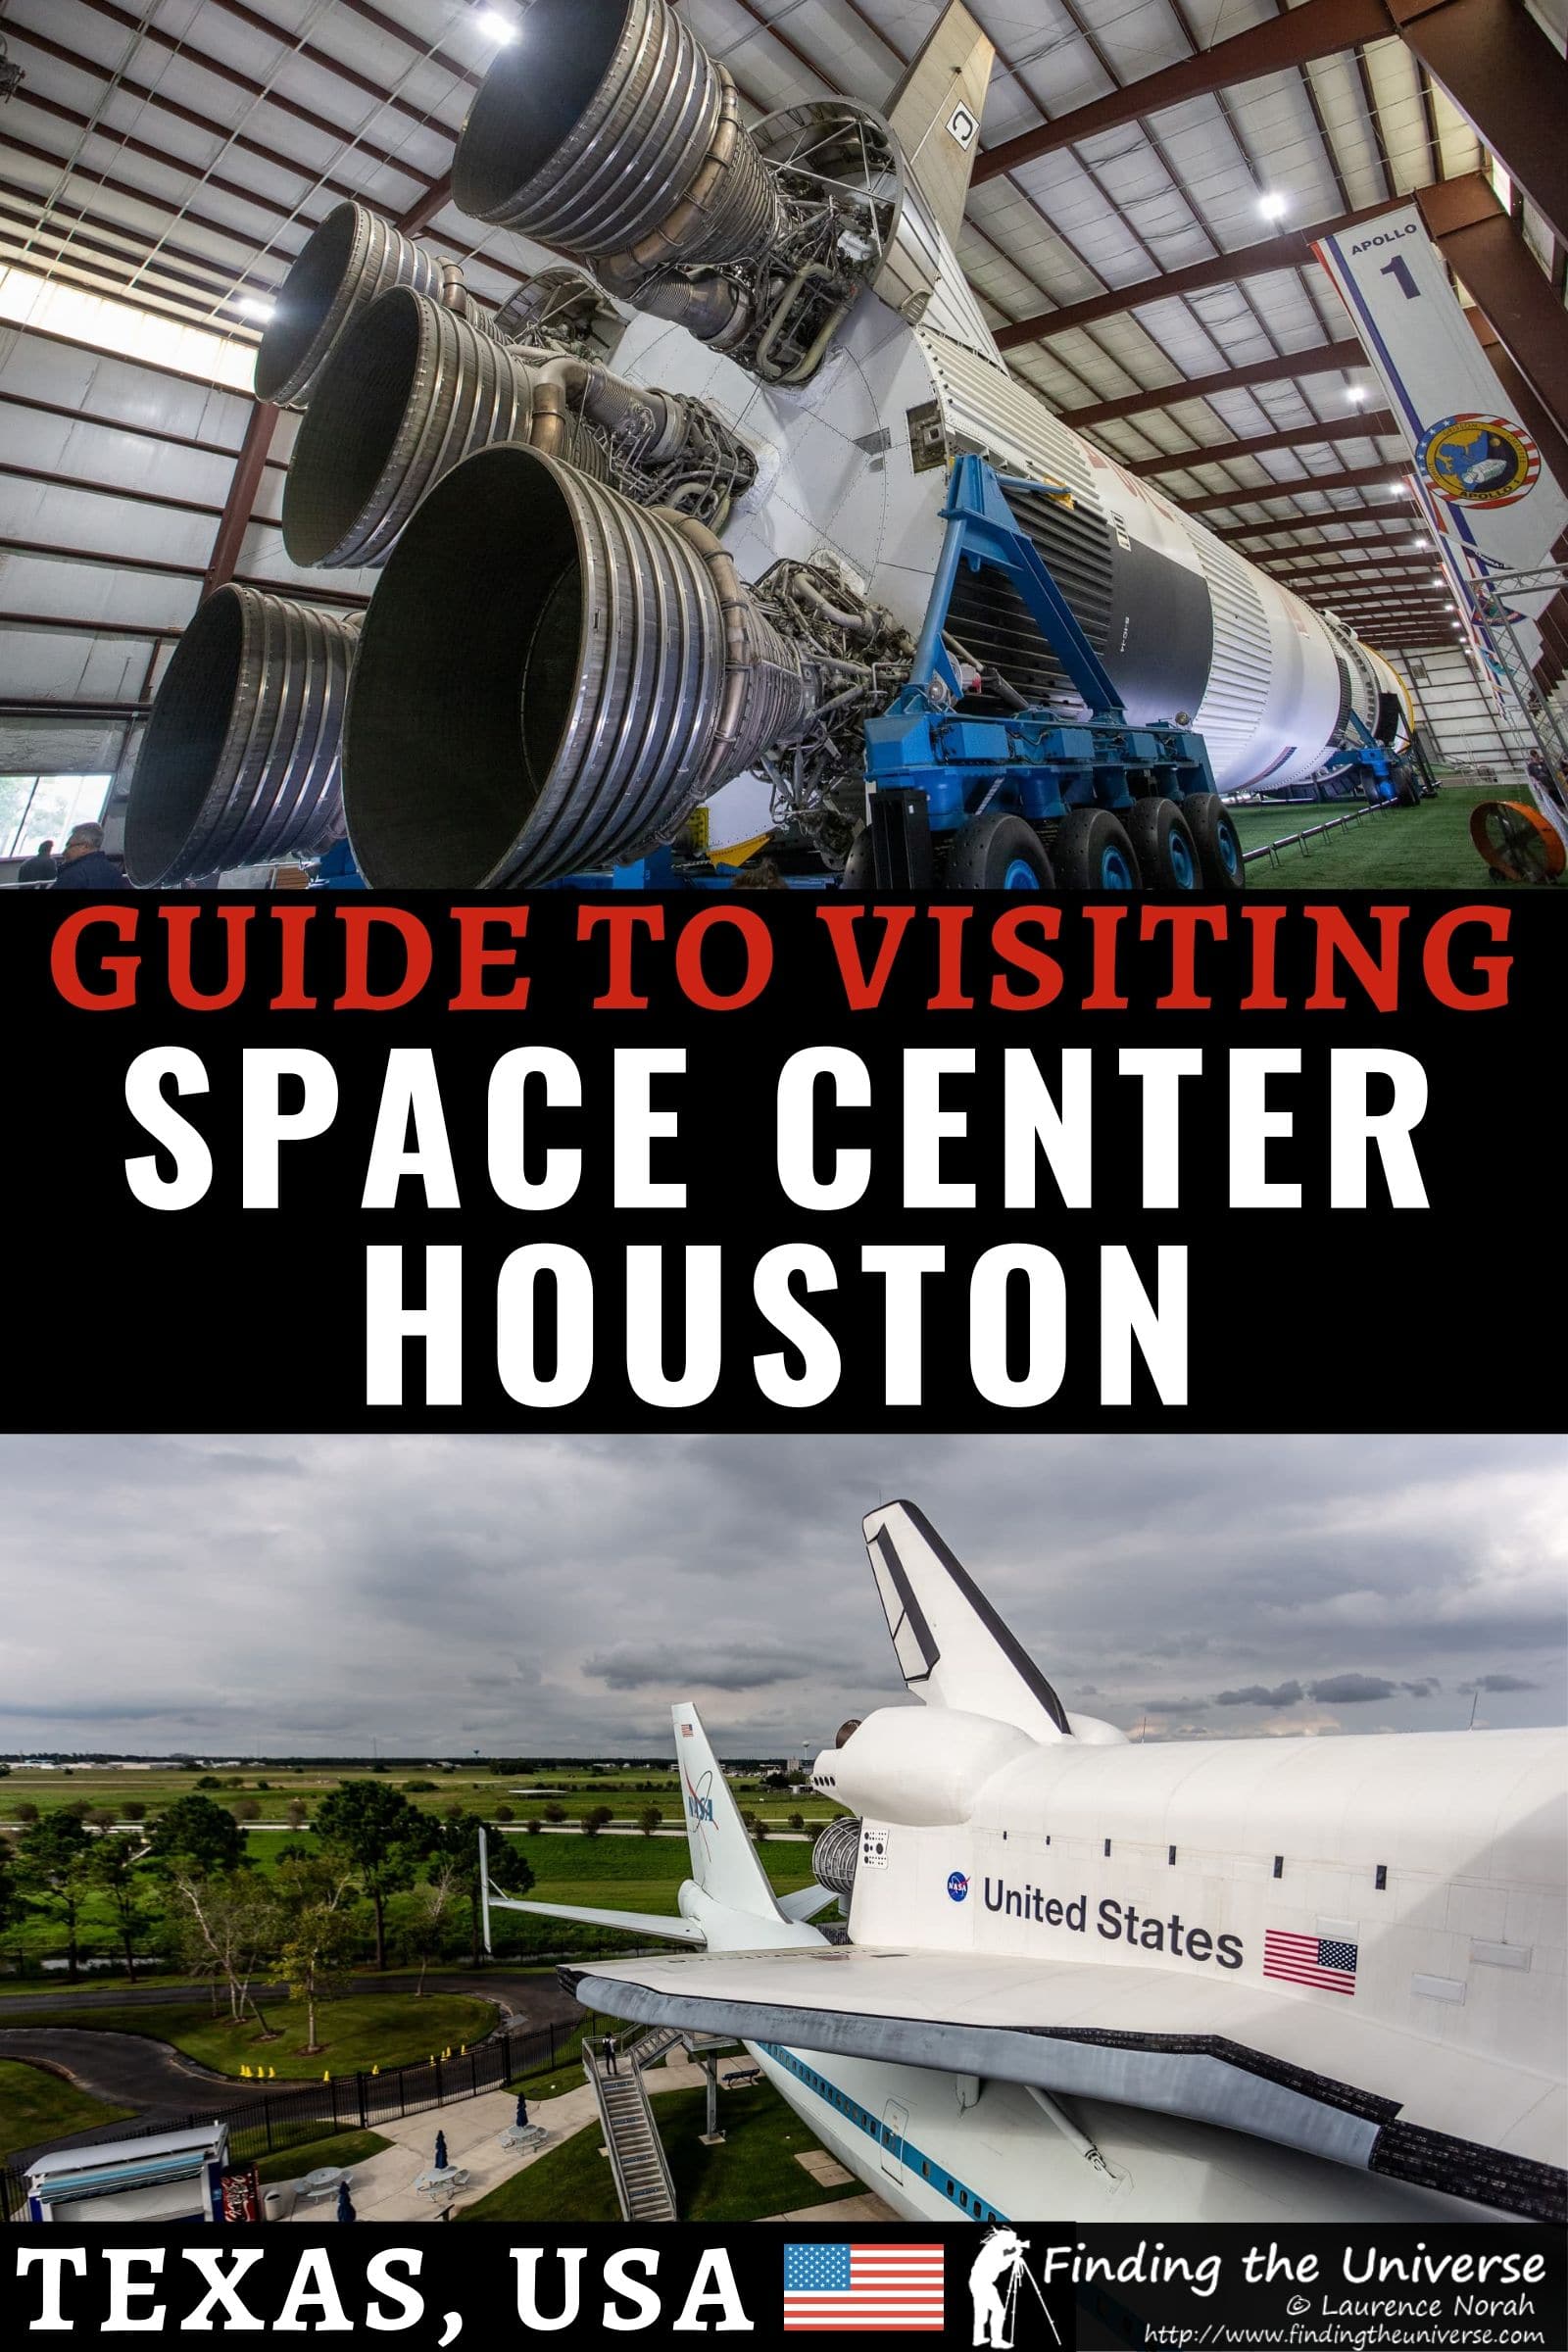 A detailed guide to visiting the Space Center in Houston. Has everything you need to know to plan your visit, including highlights, the tram tour, and more!